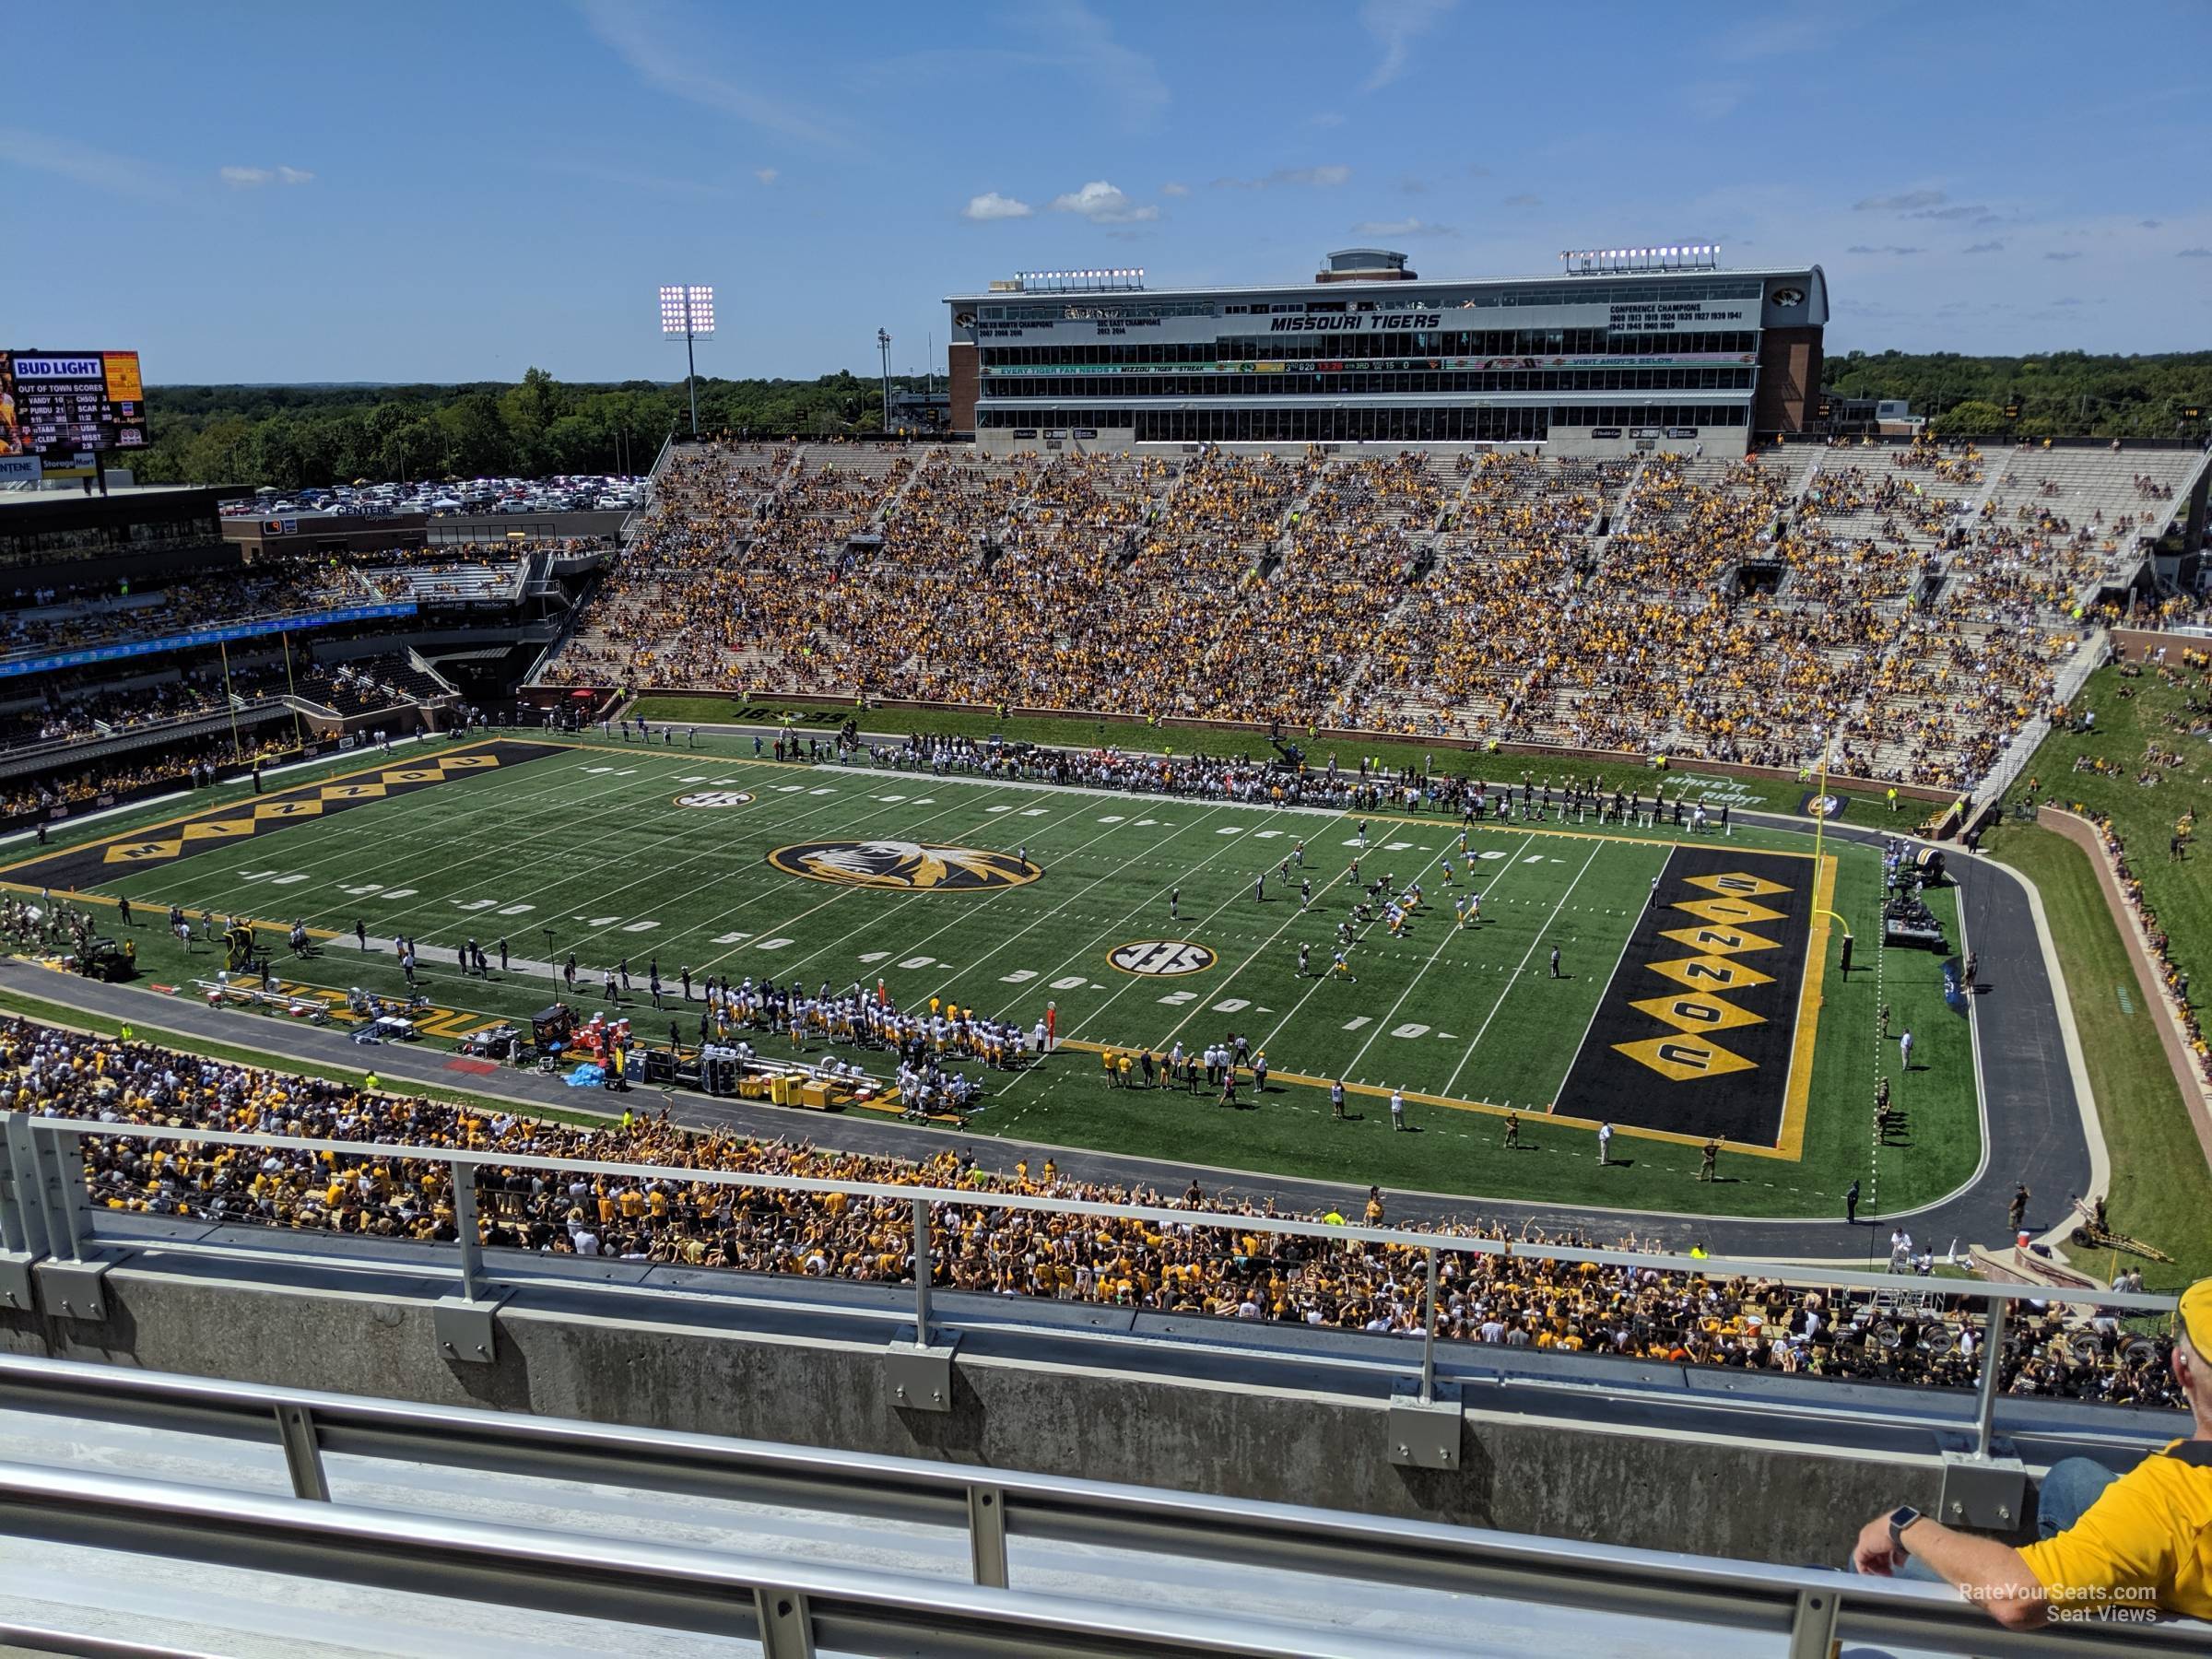 section 313, row 4 seat view  - faurot field